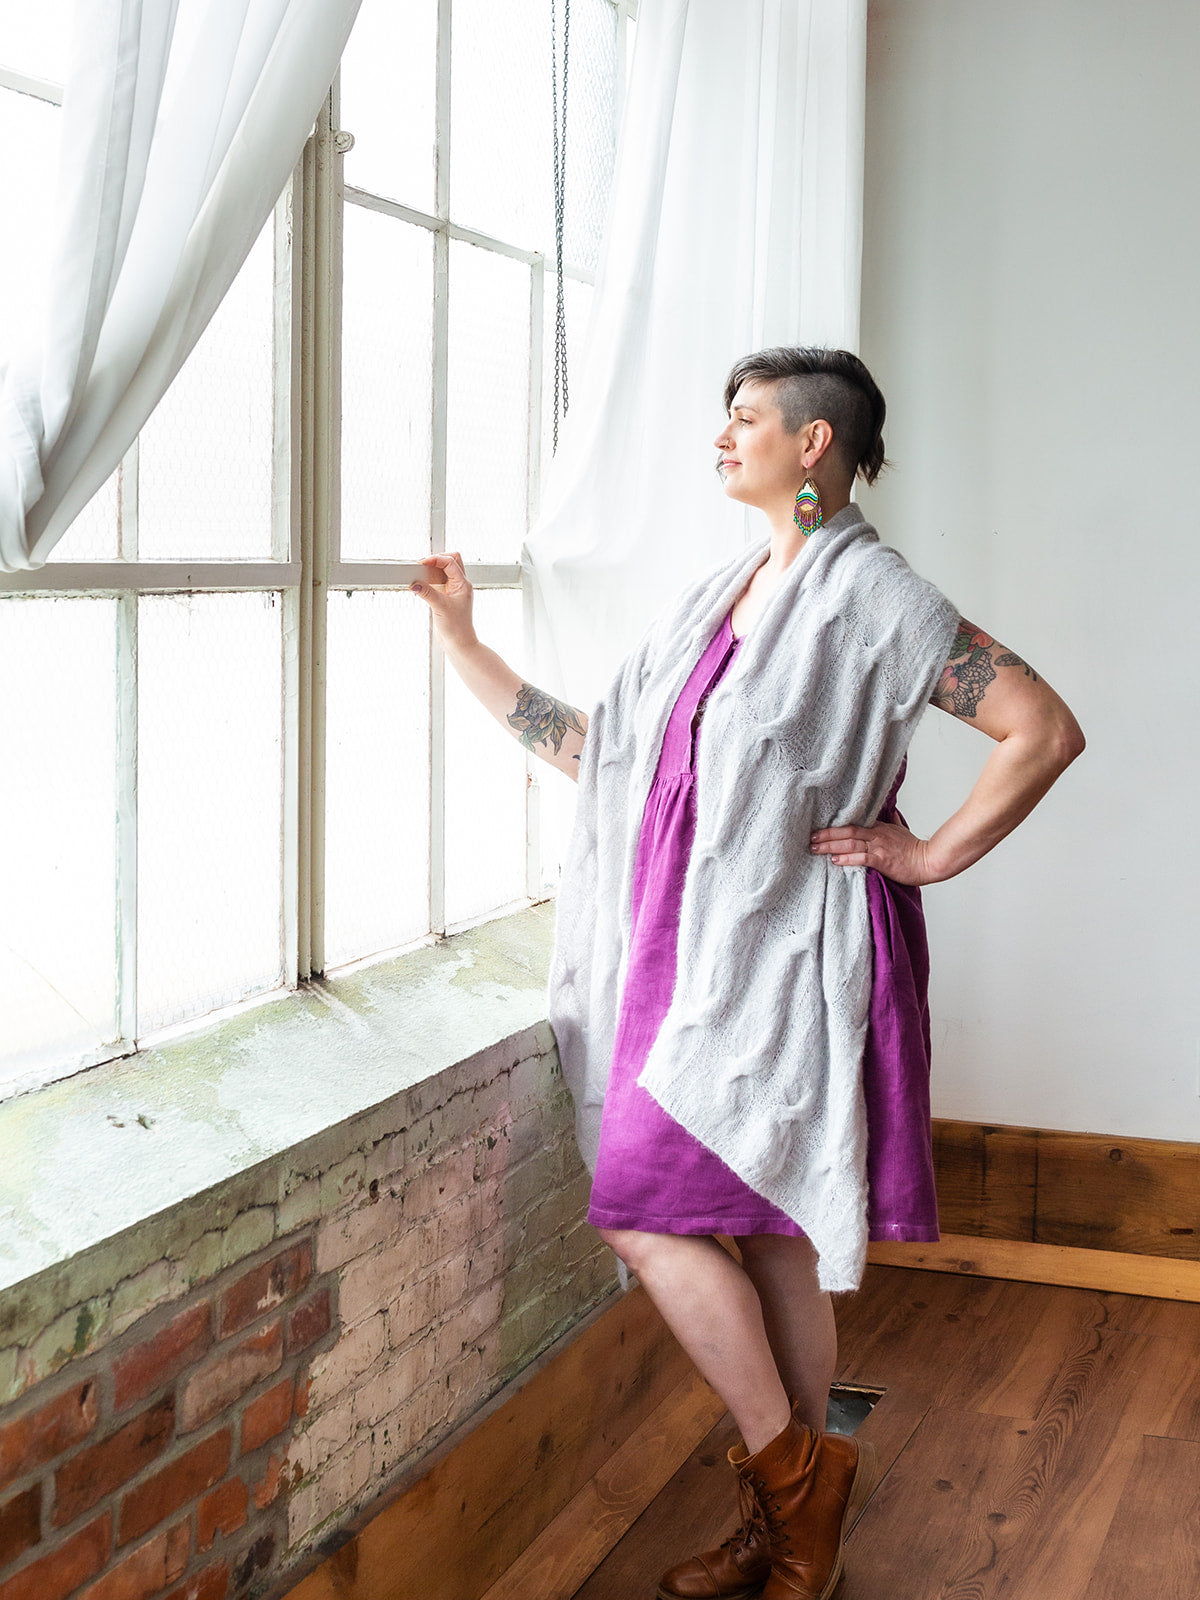 Seen from the side, Jen stands in front of a window, wearing a magenta dress under a light blue rectangle shawl, knit with fluffy yarn.